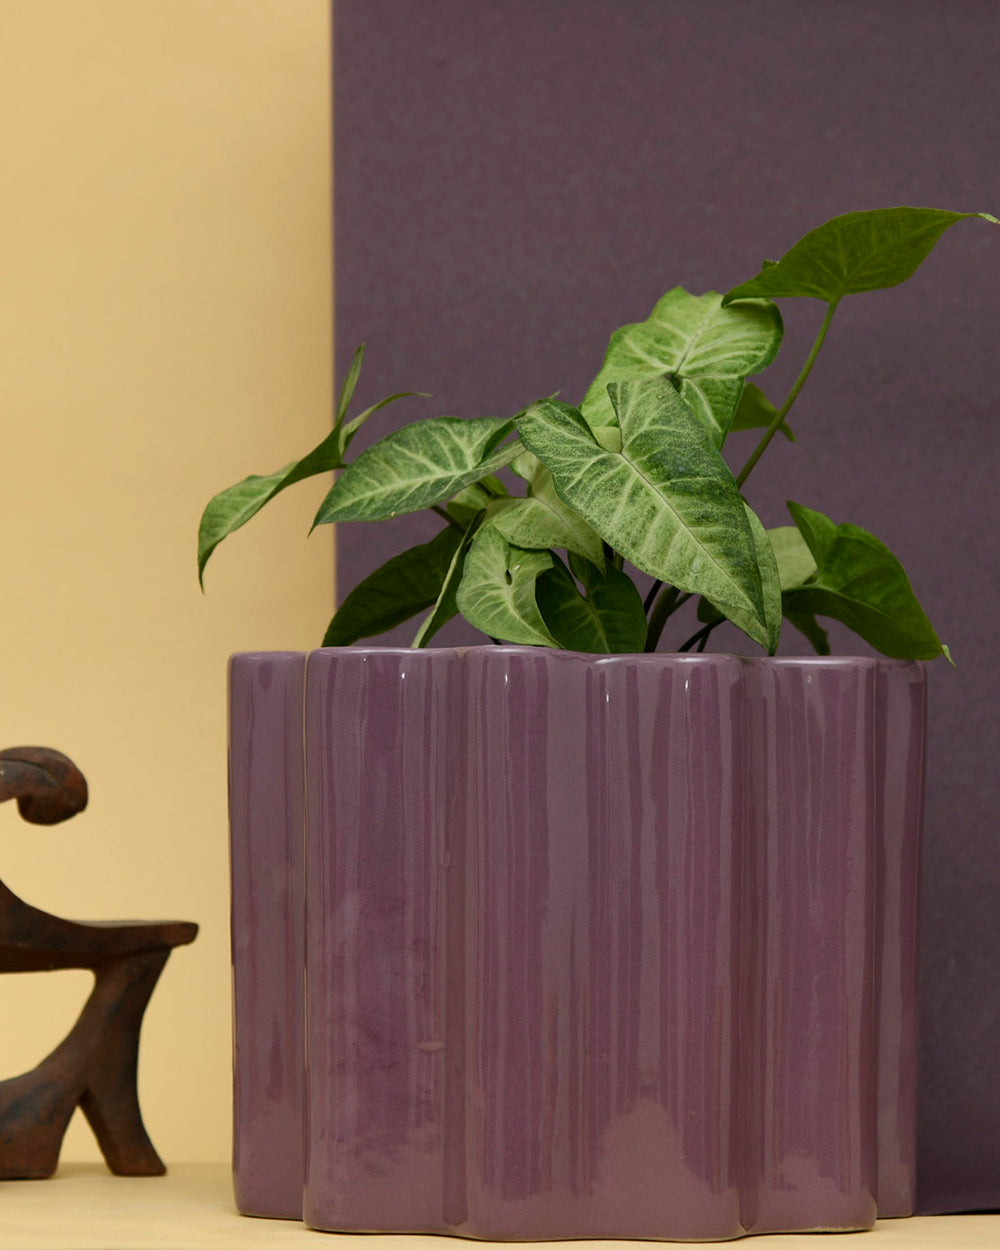 Medium size Balmy Waves Ceramic Planter in Blackberry color with Syngonium Plant.